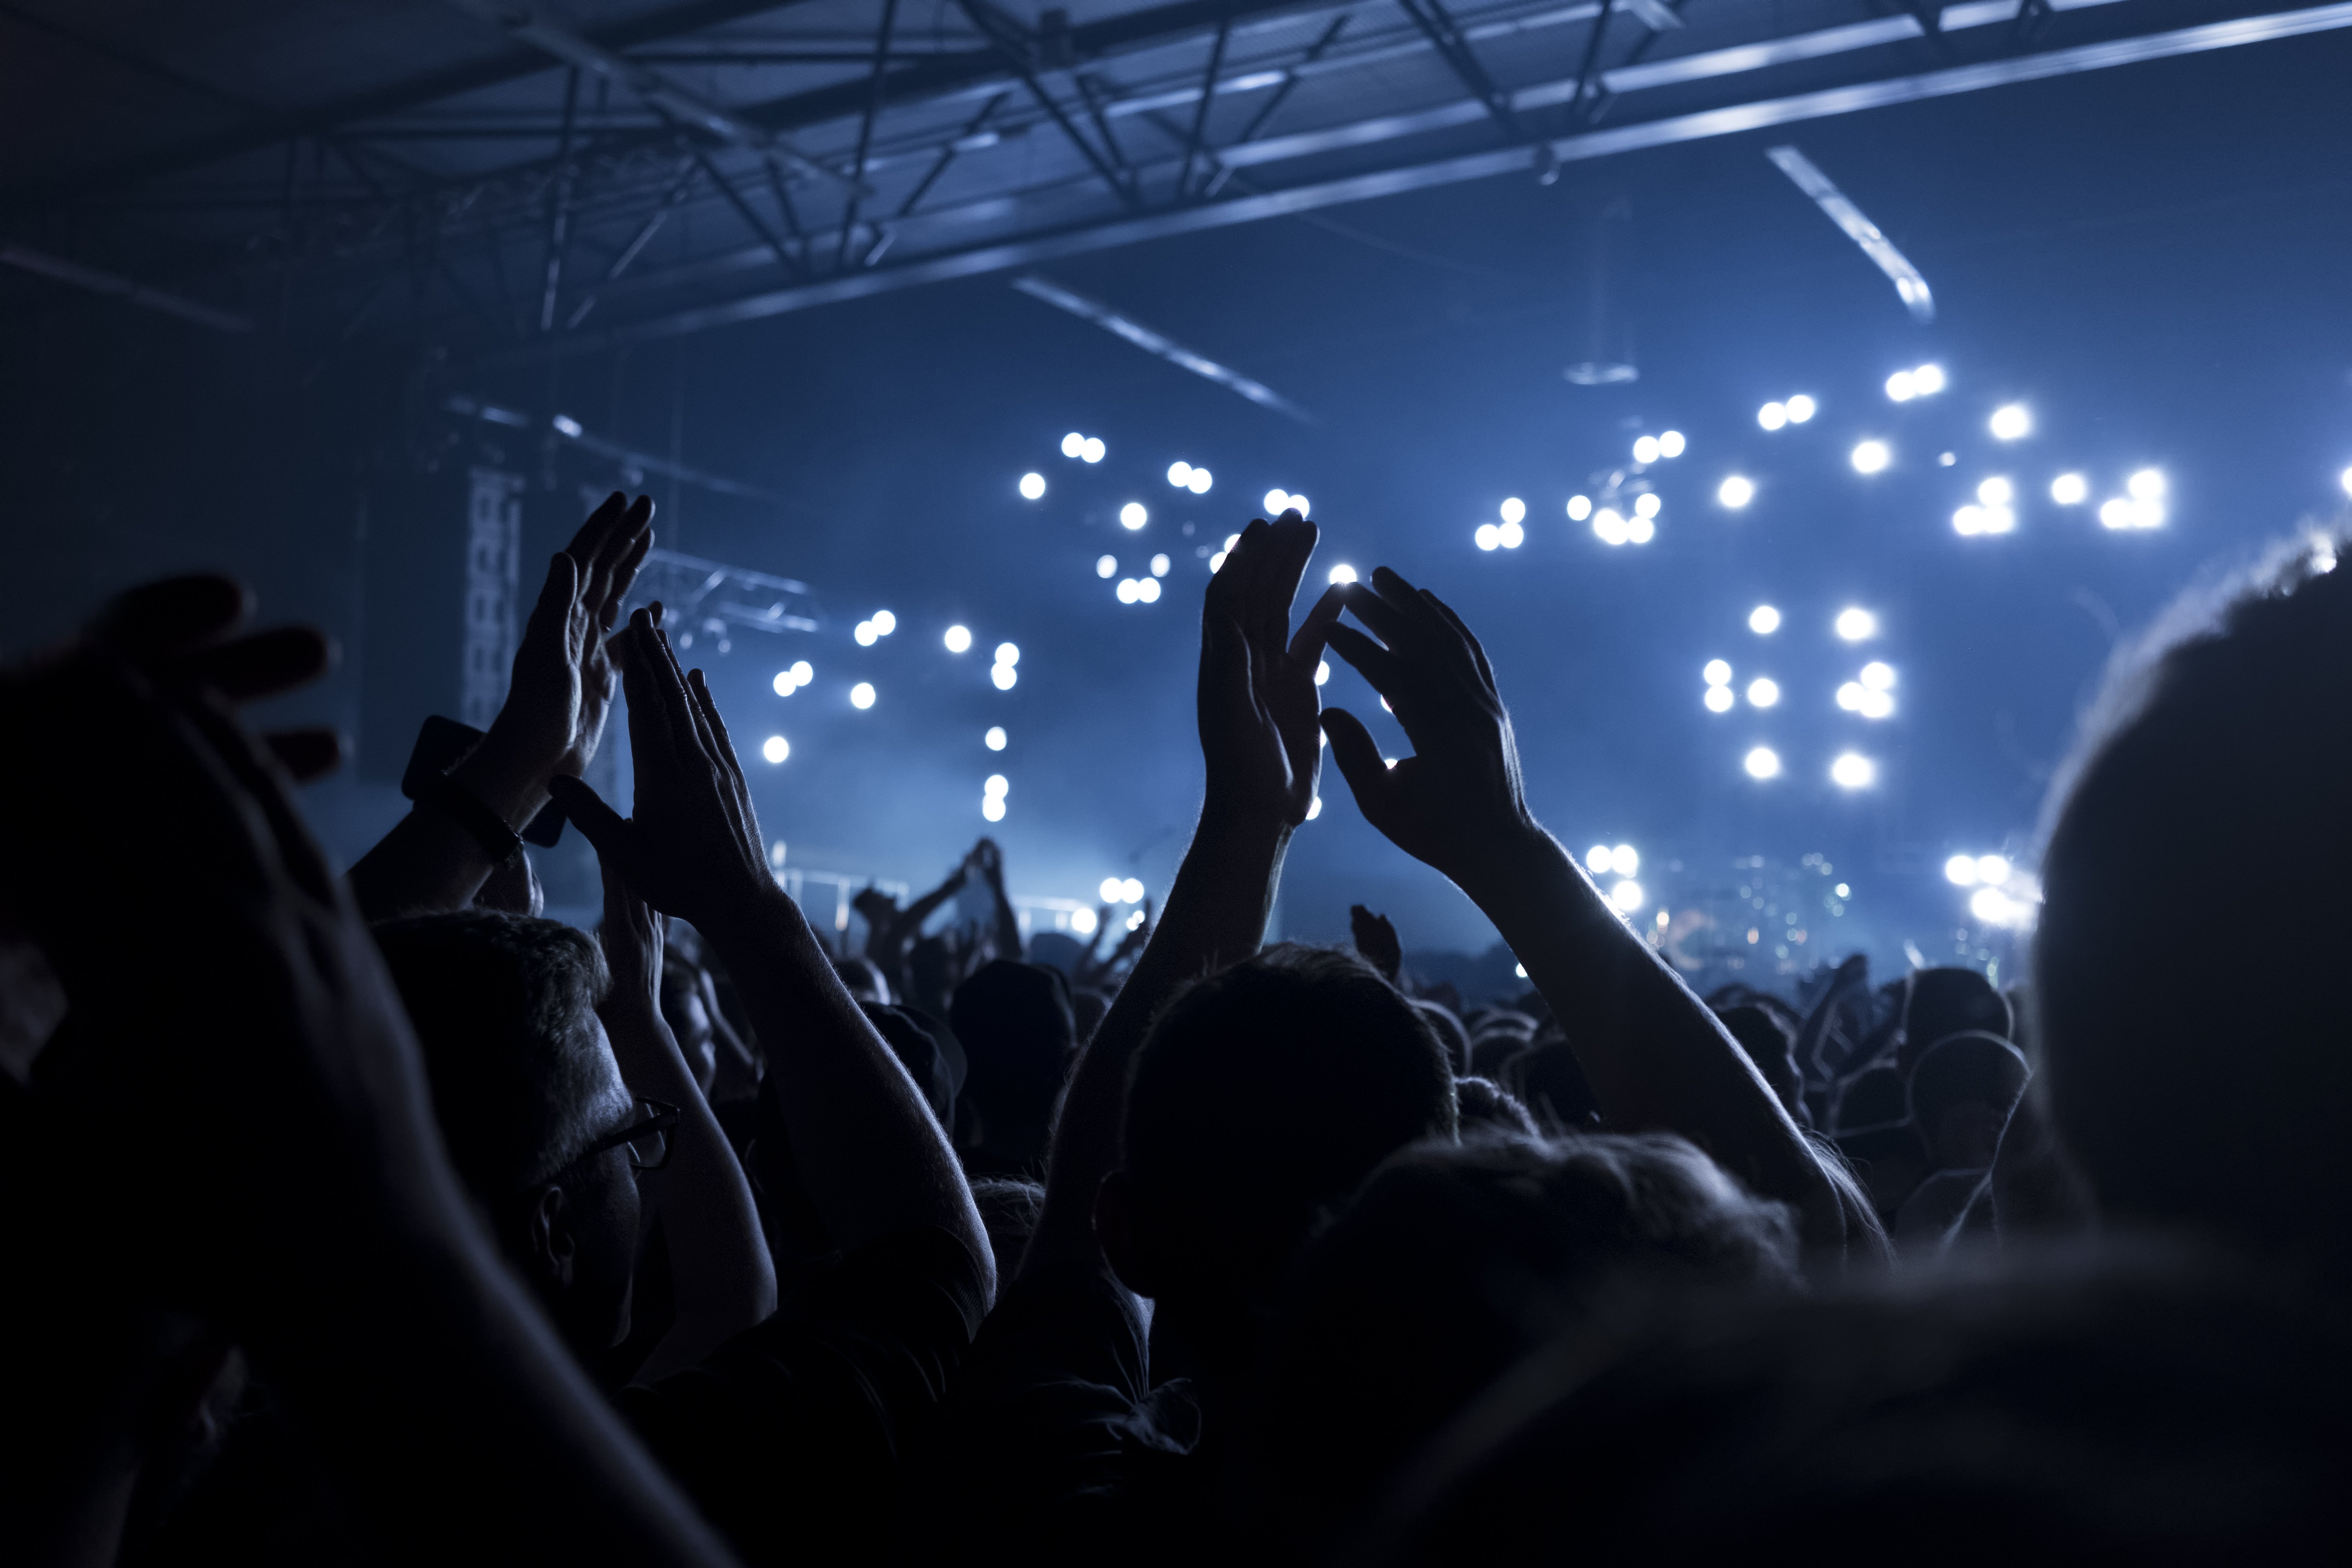 Are You Ready For It? Live Entertainment is Making a Comeback and So Should Your Marketing